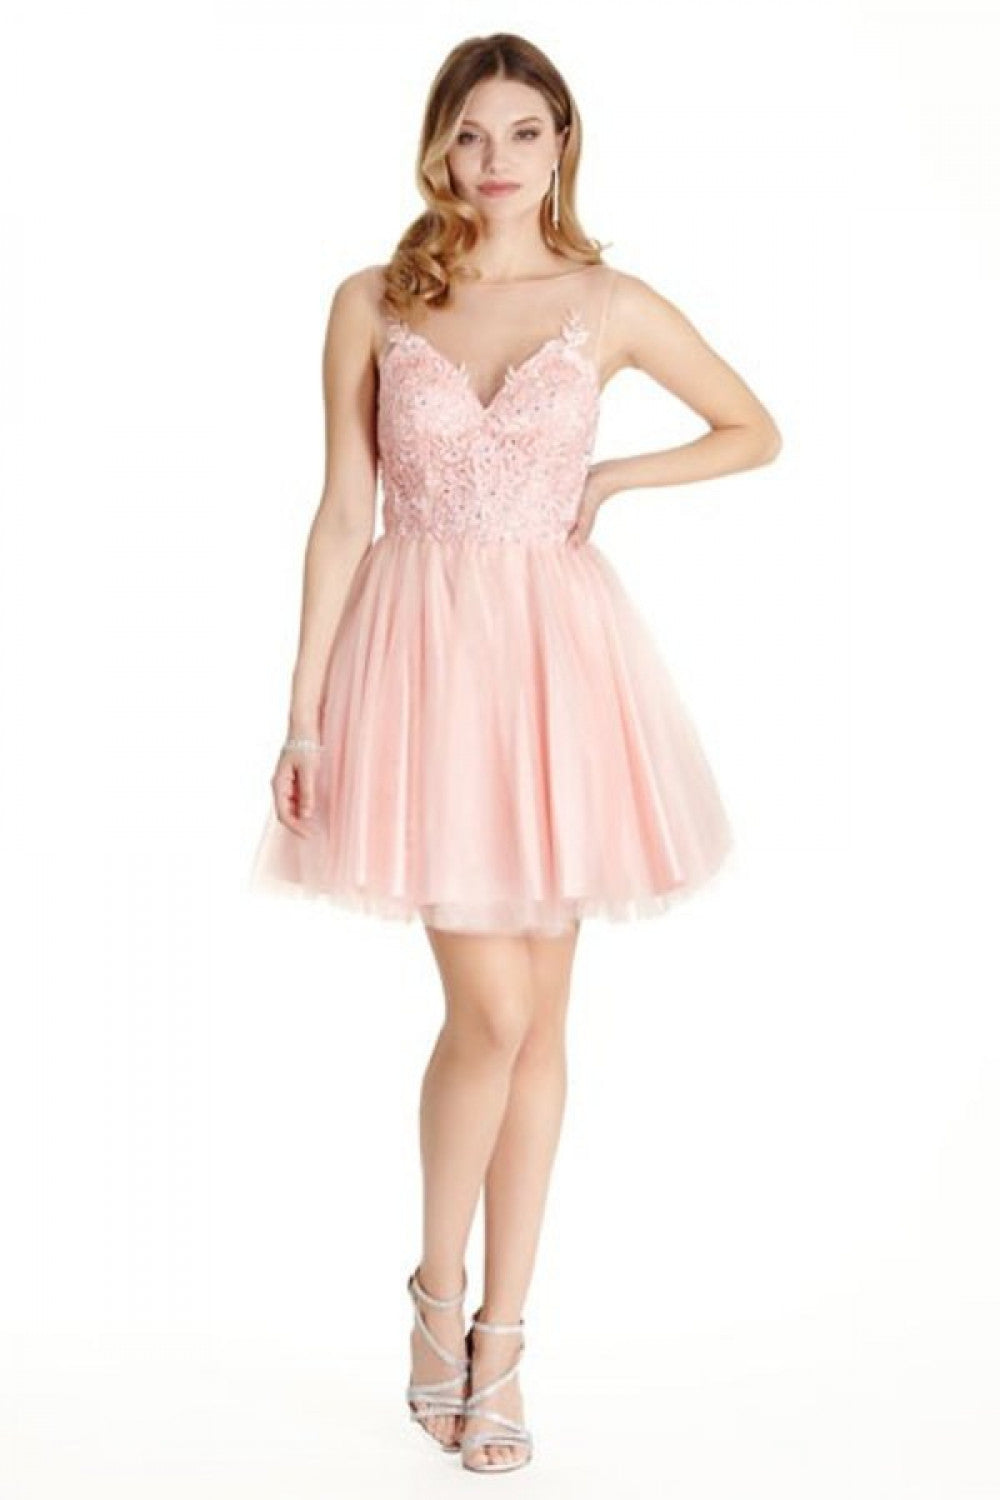 Aspeed Design -S1775 Sweetheart Illusion A-Line Short Cocktail Dress